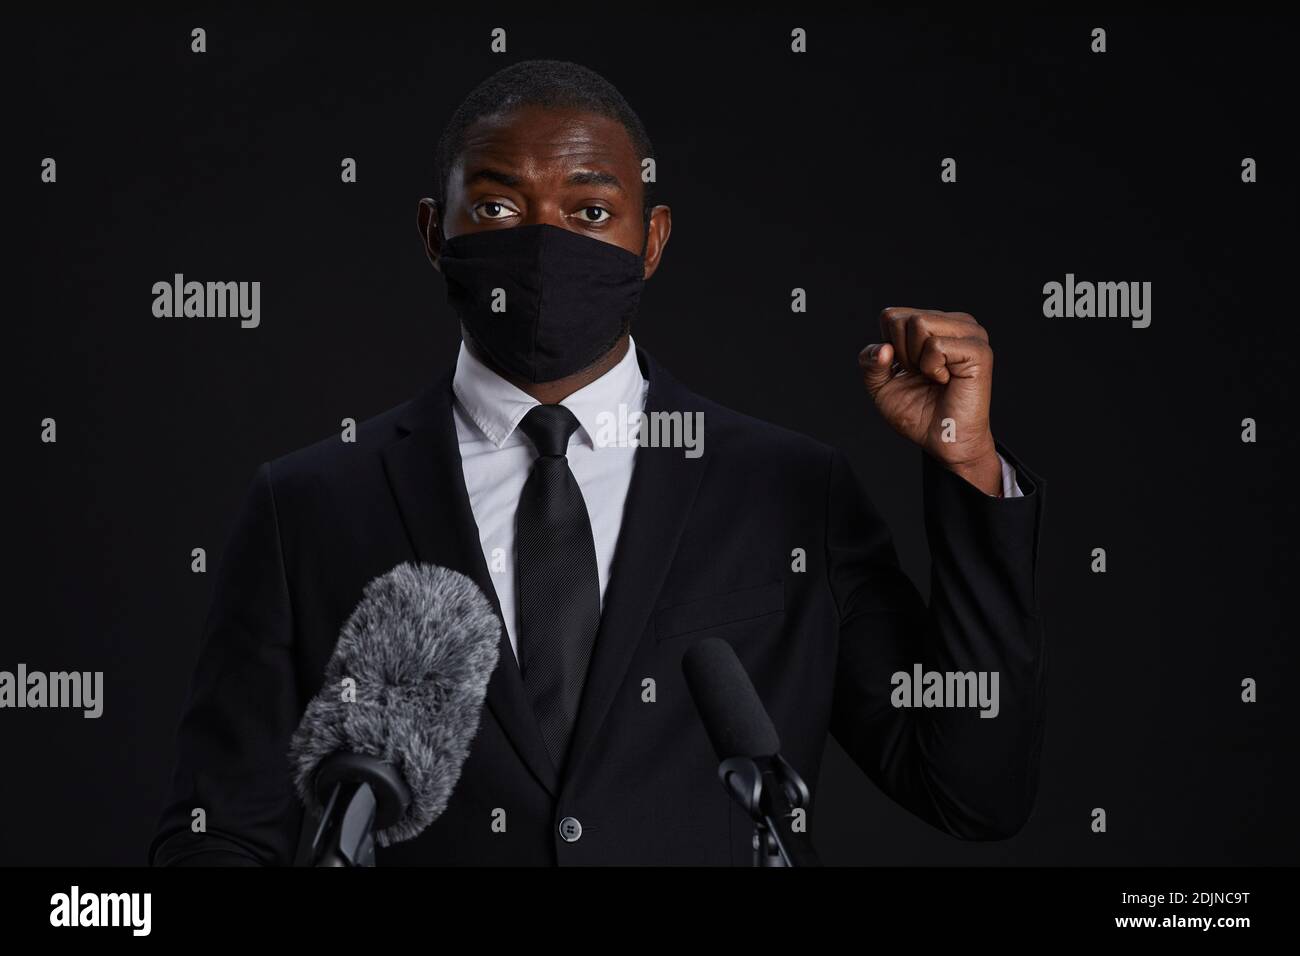 Portrait of African-American man wearing mask while giving powerful speech standing at podium against black background, copy space Stock Photo